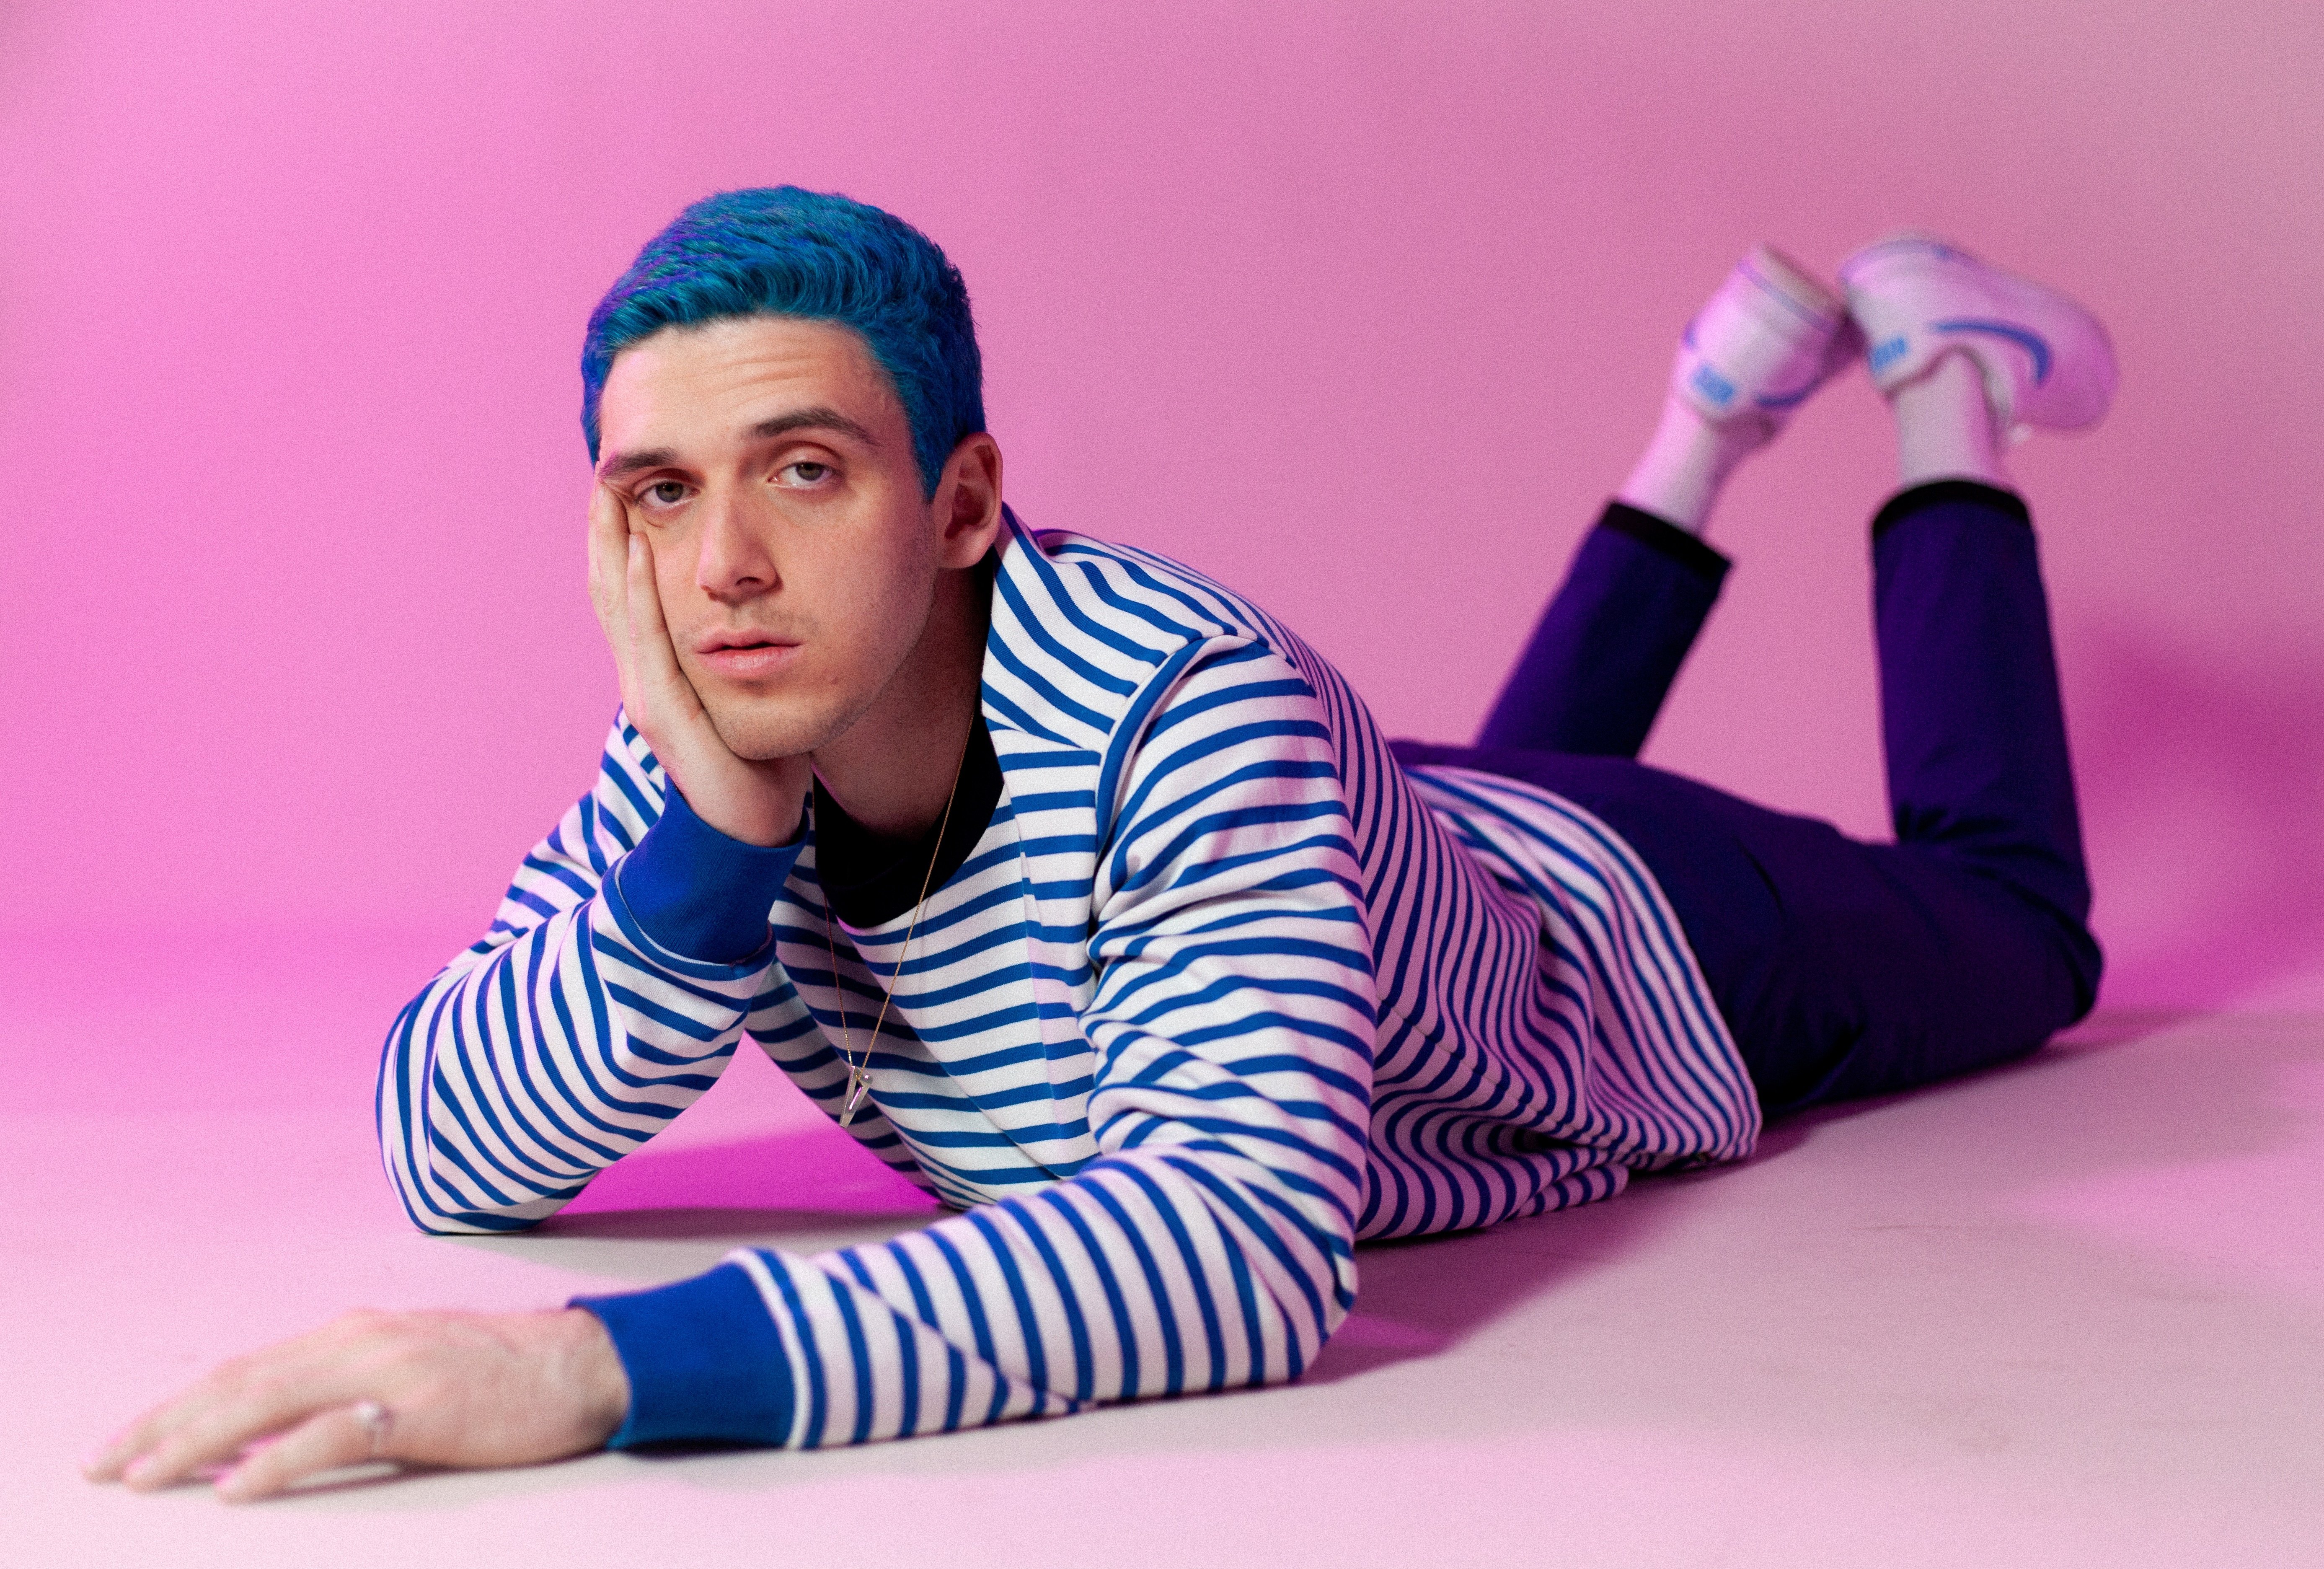 1. Lauv's iconic blue hair in the music video for "I Like Me Better" - wide 1